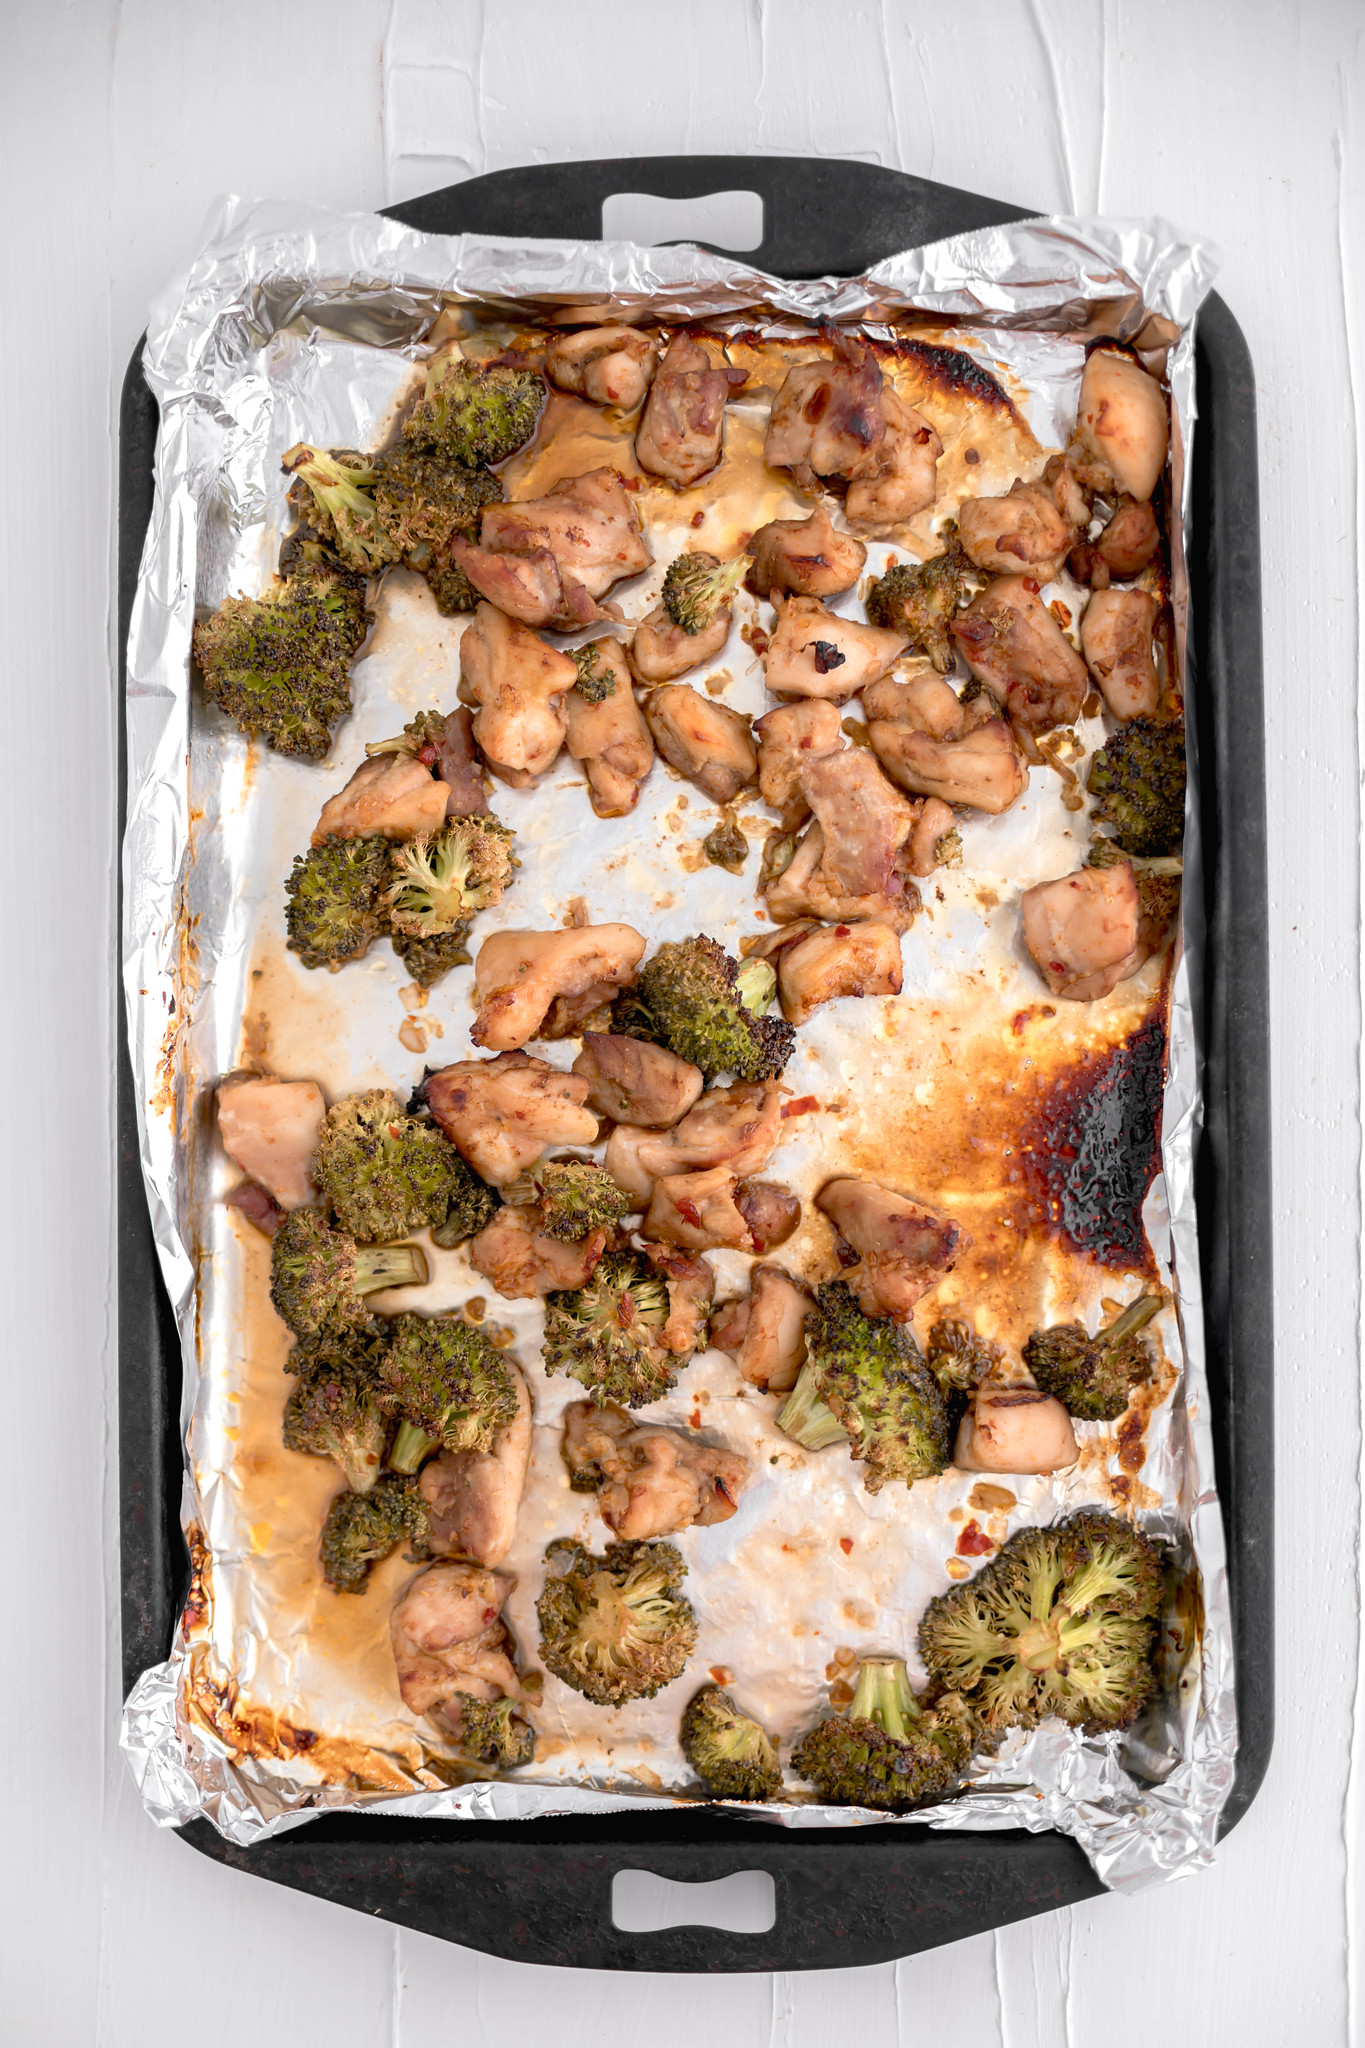 Chicken and broccoli baked in a sweet chili sauce on a foil lined baking sheet.